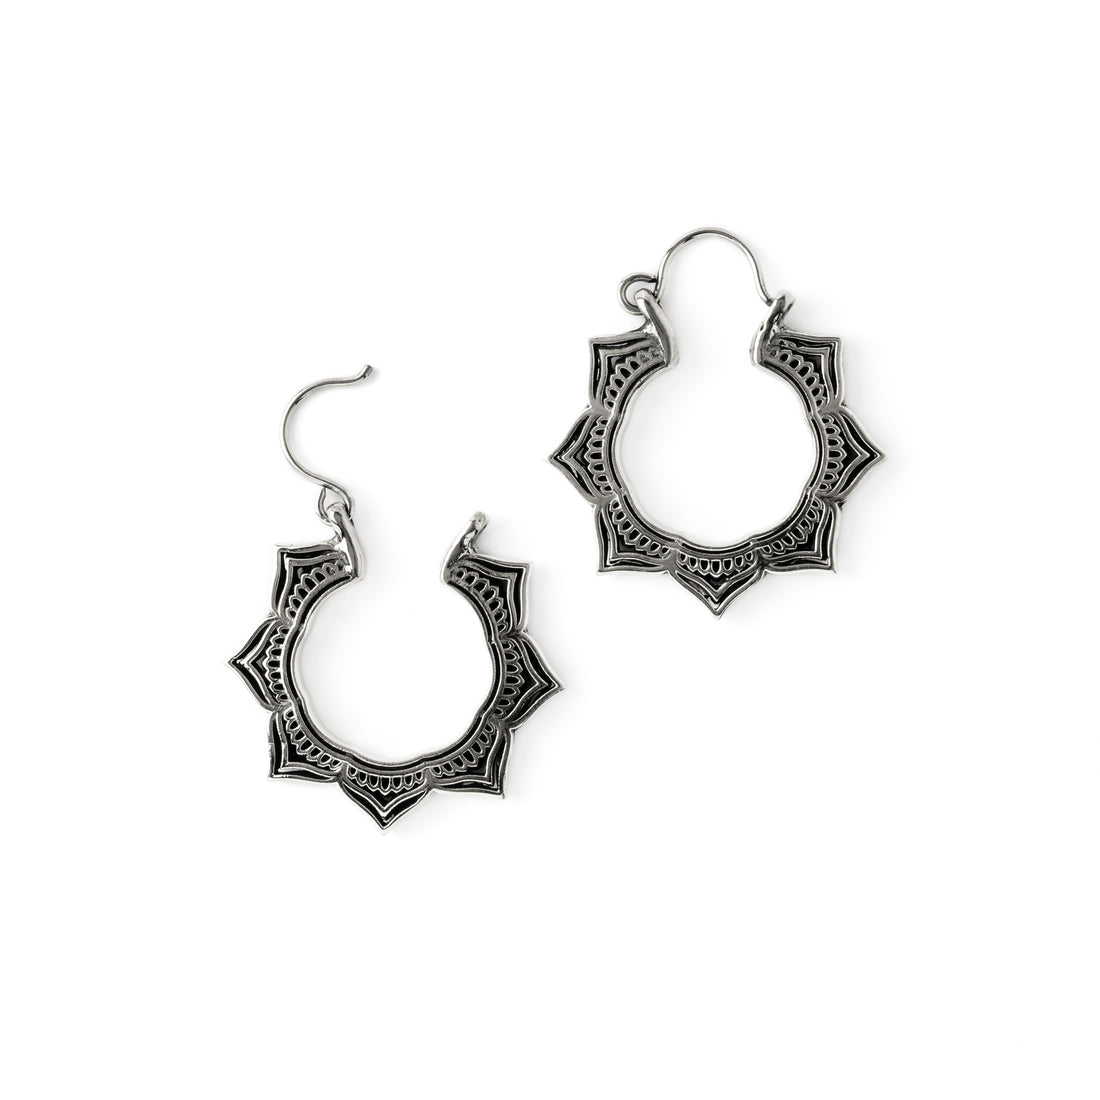 Padma Blossom Earrings frontal view